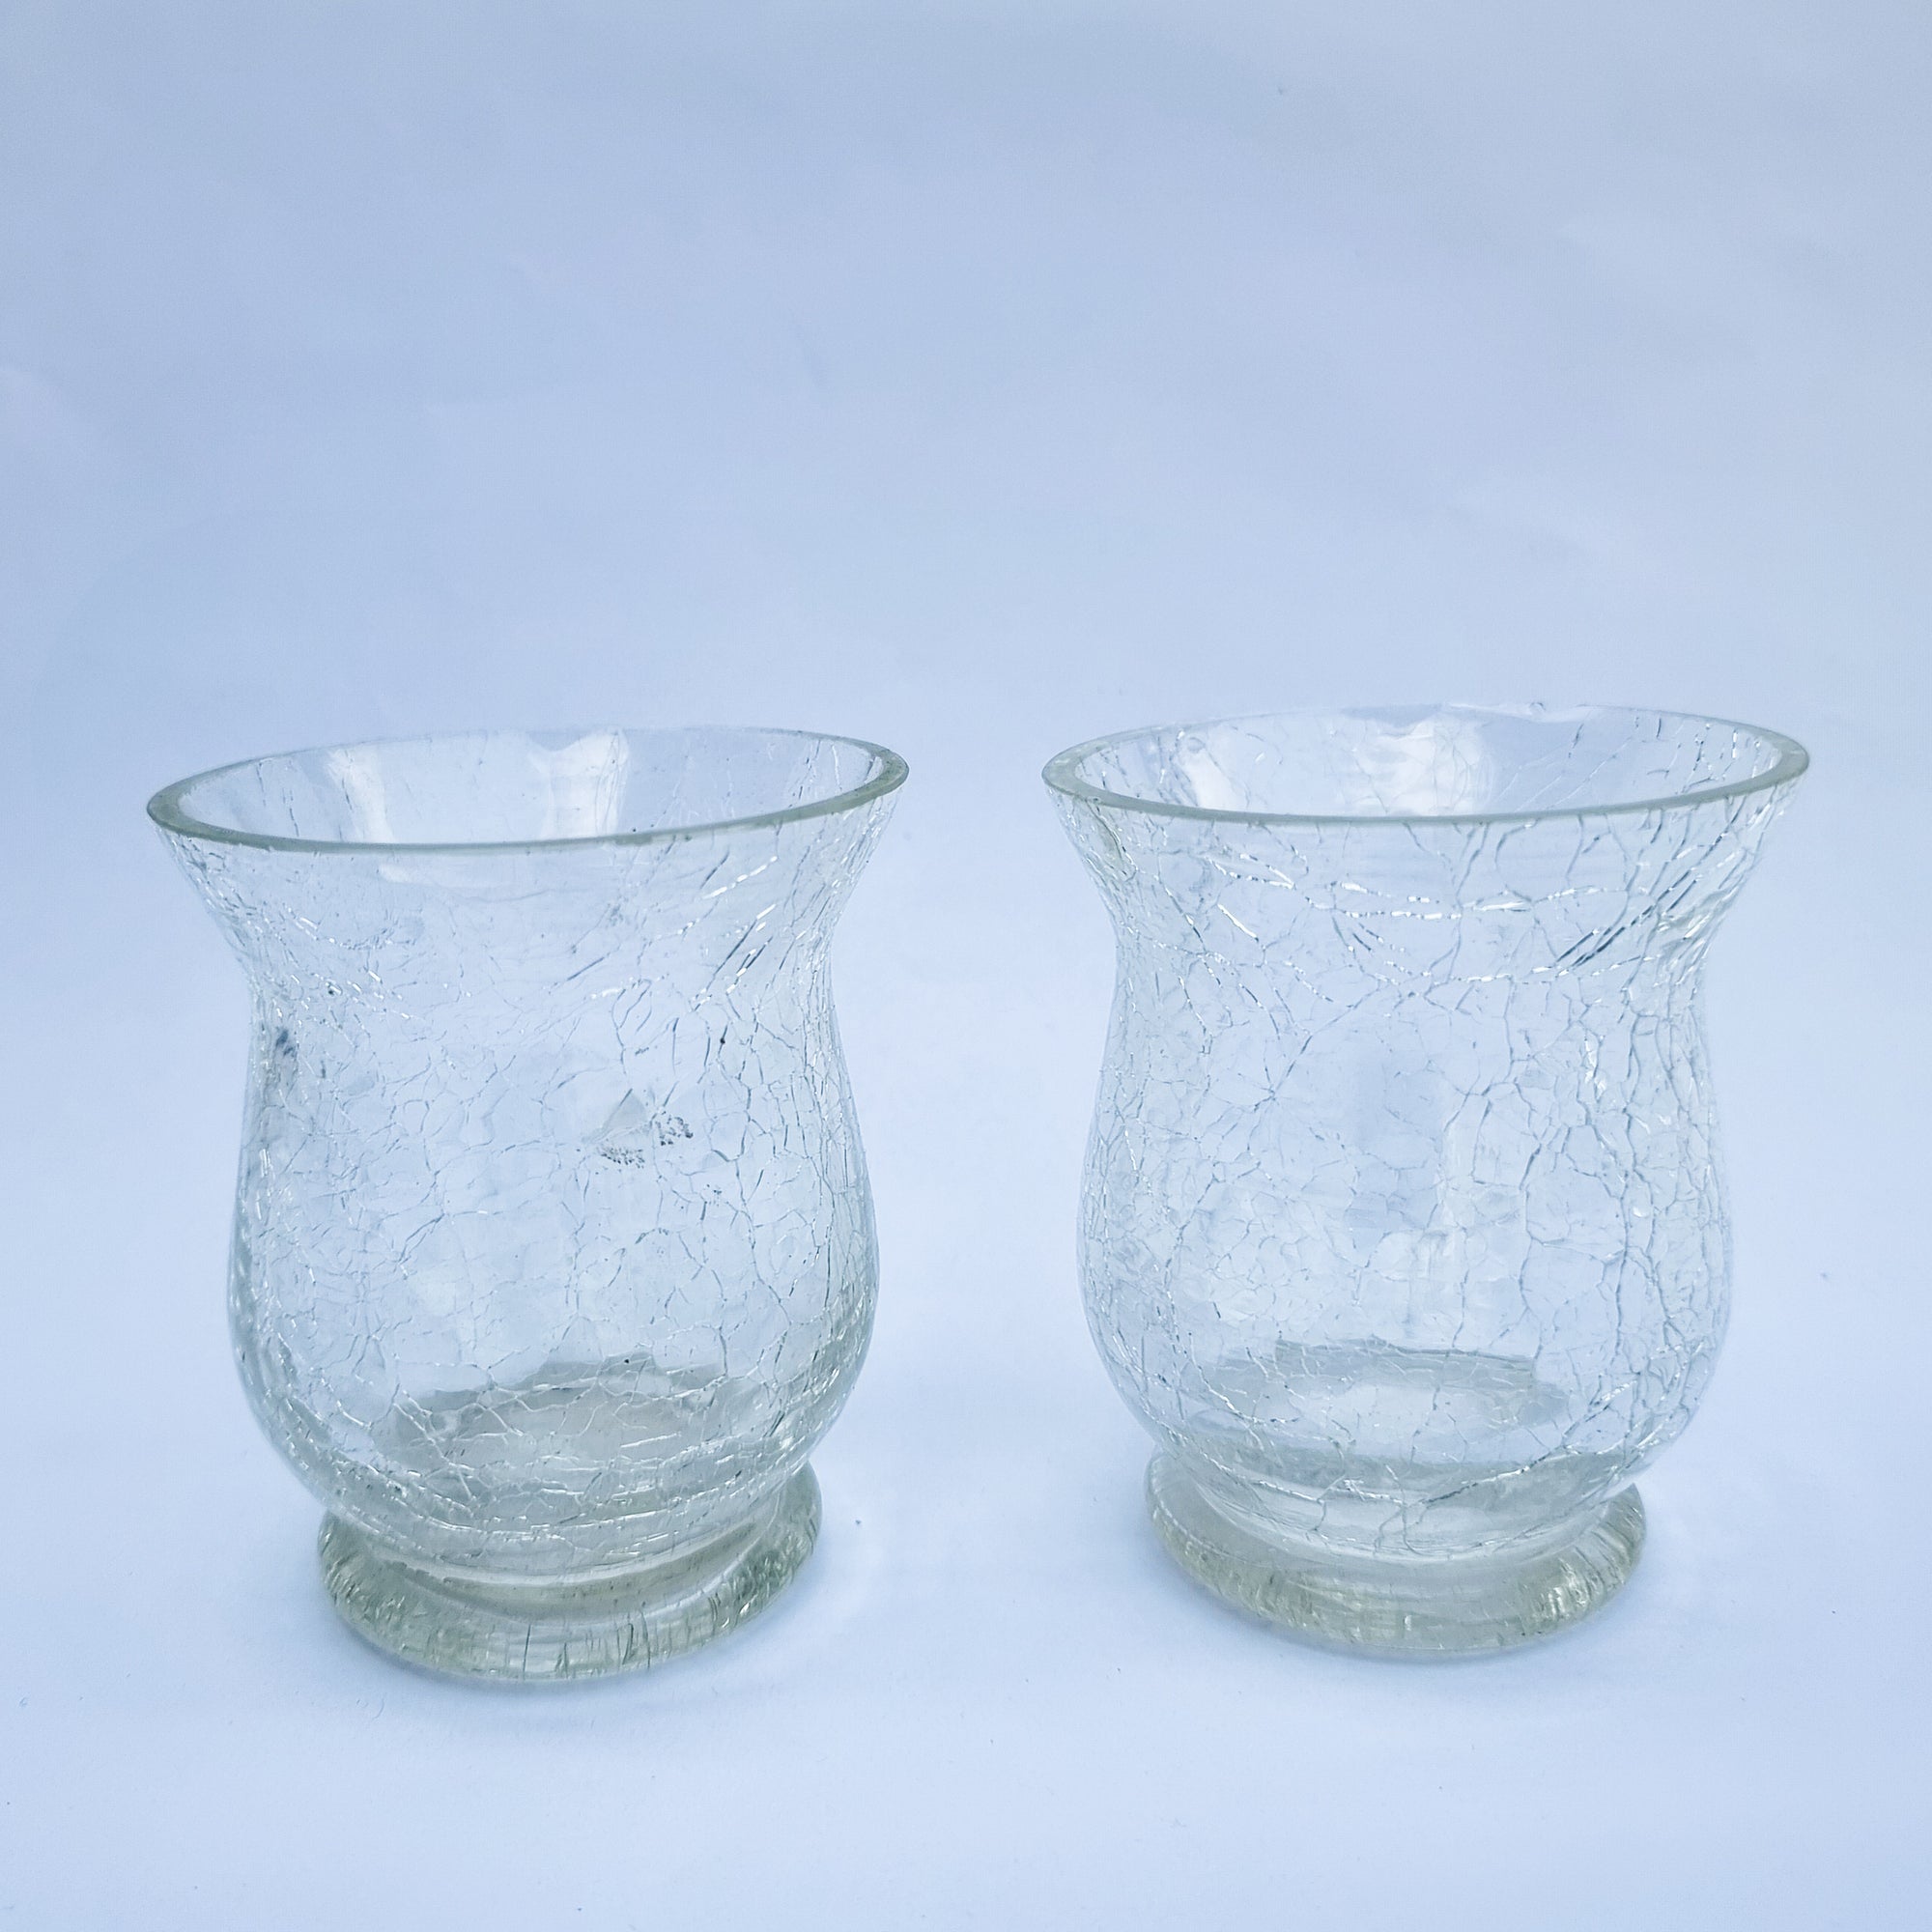 Pair of Glass Tea Light Candle Holders - Pre-loved